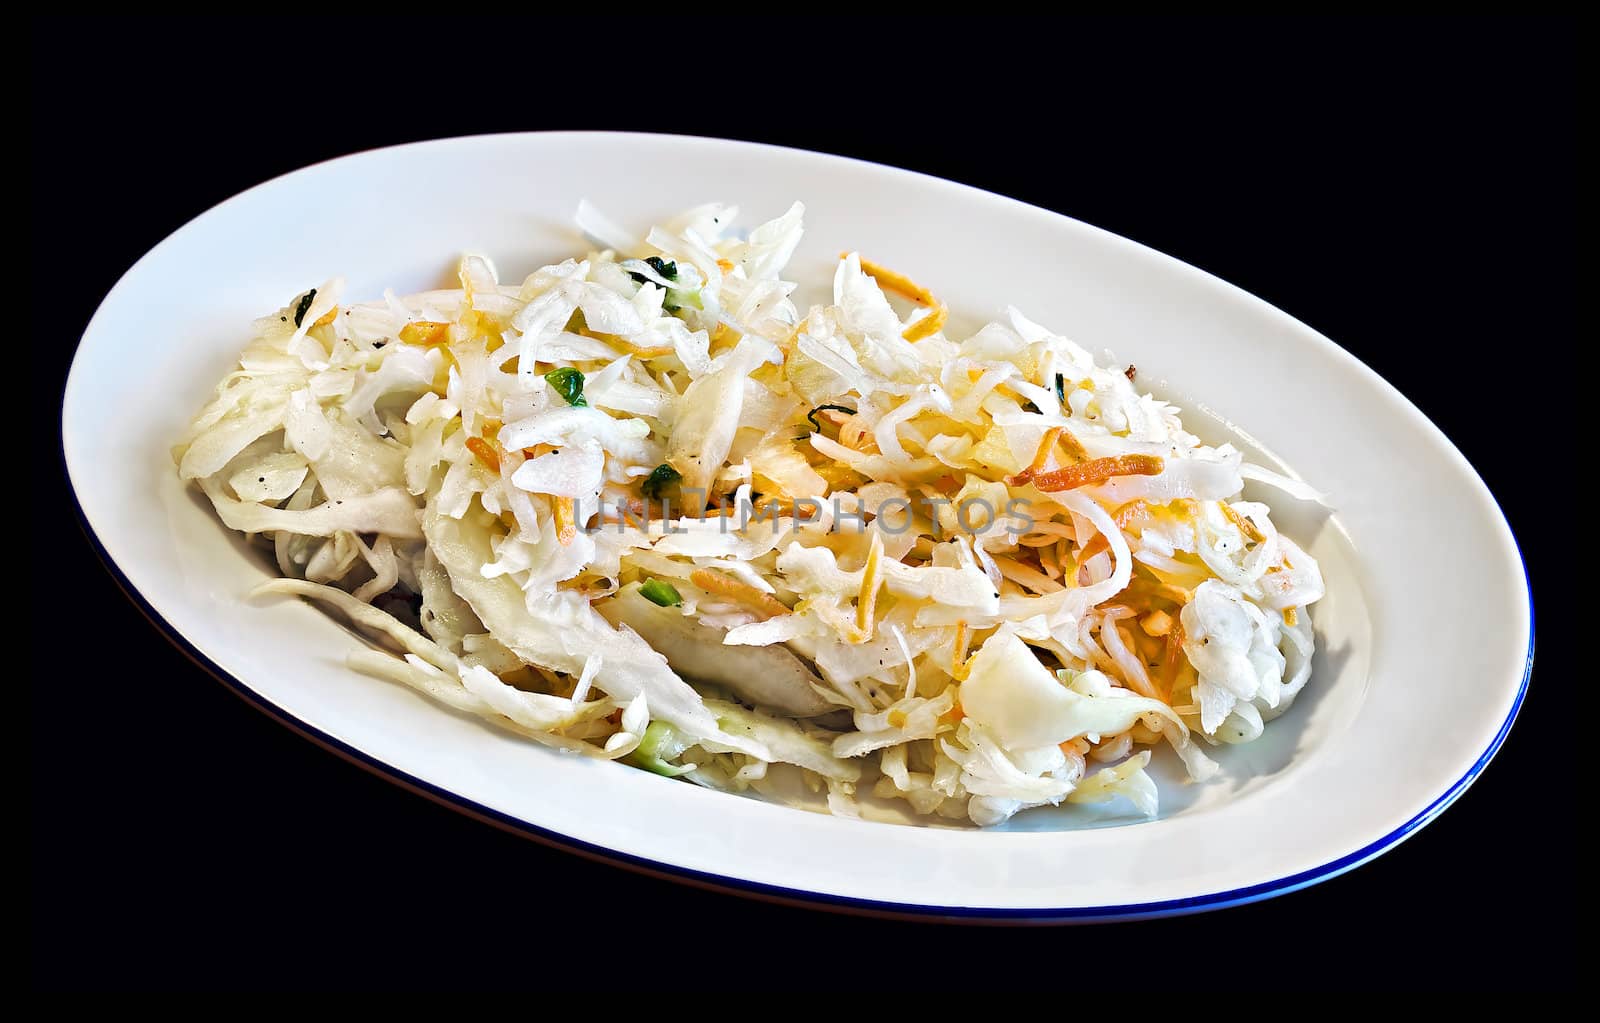 Cabbage salad on a plate isolated on black